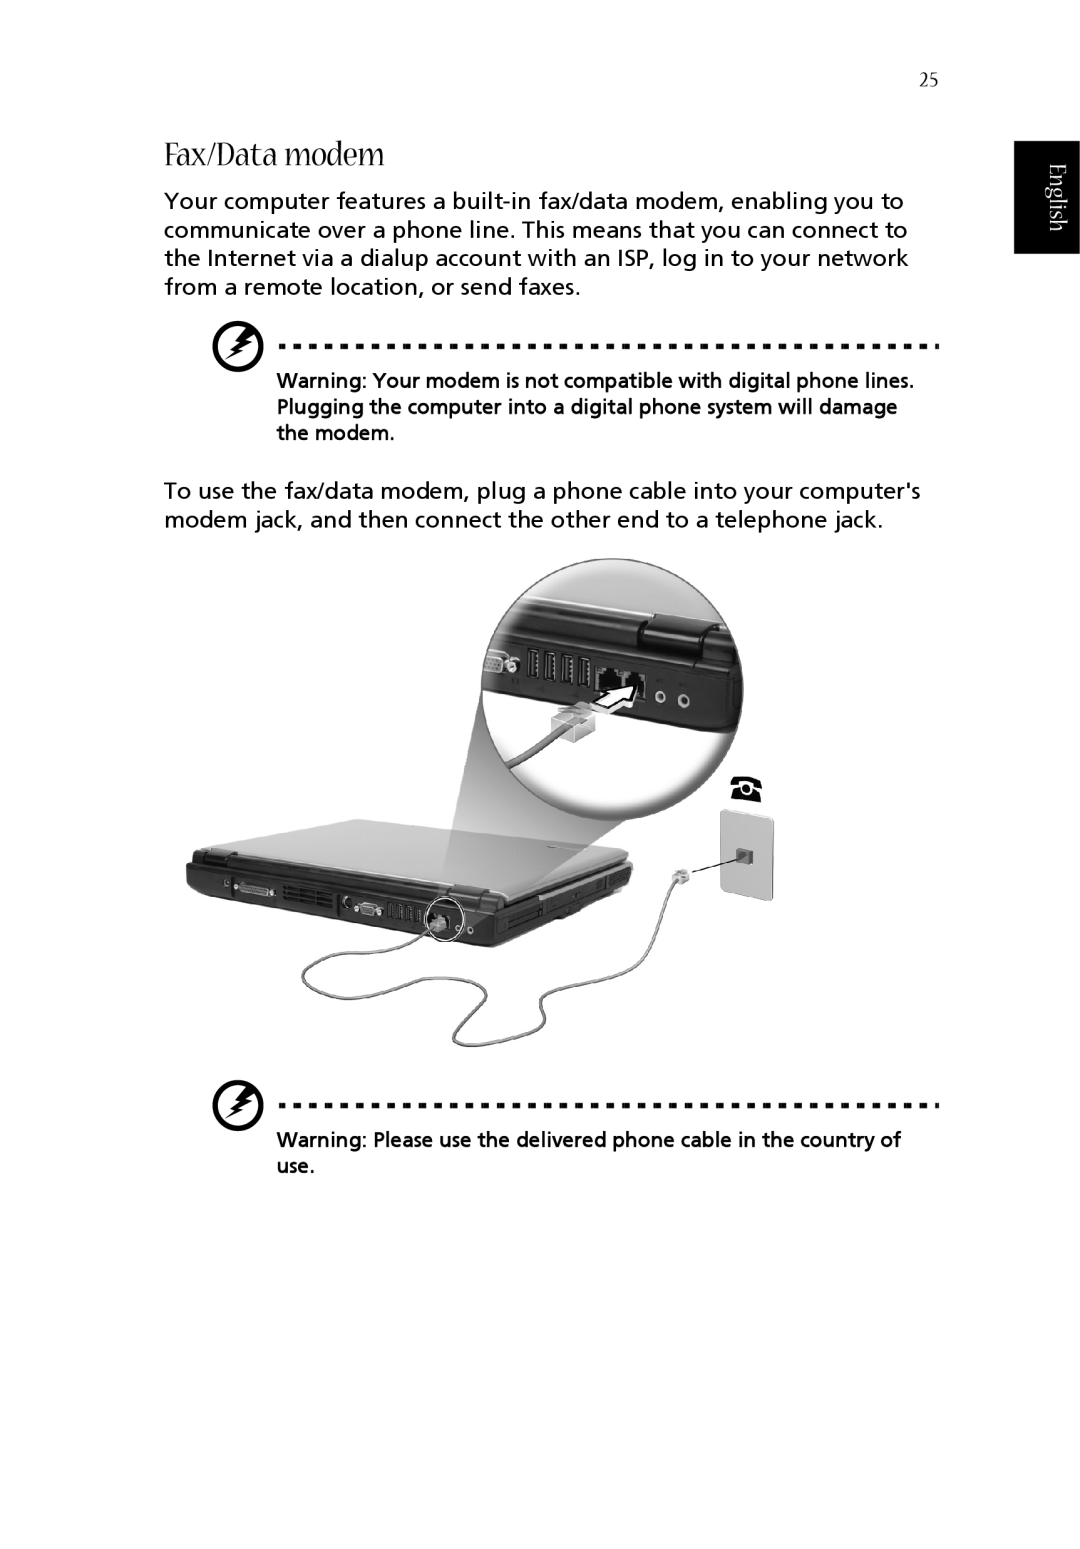 Acer 1360 manual Fax/Data modem, English, Warning Please use the delivered phone cable in the country of use 